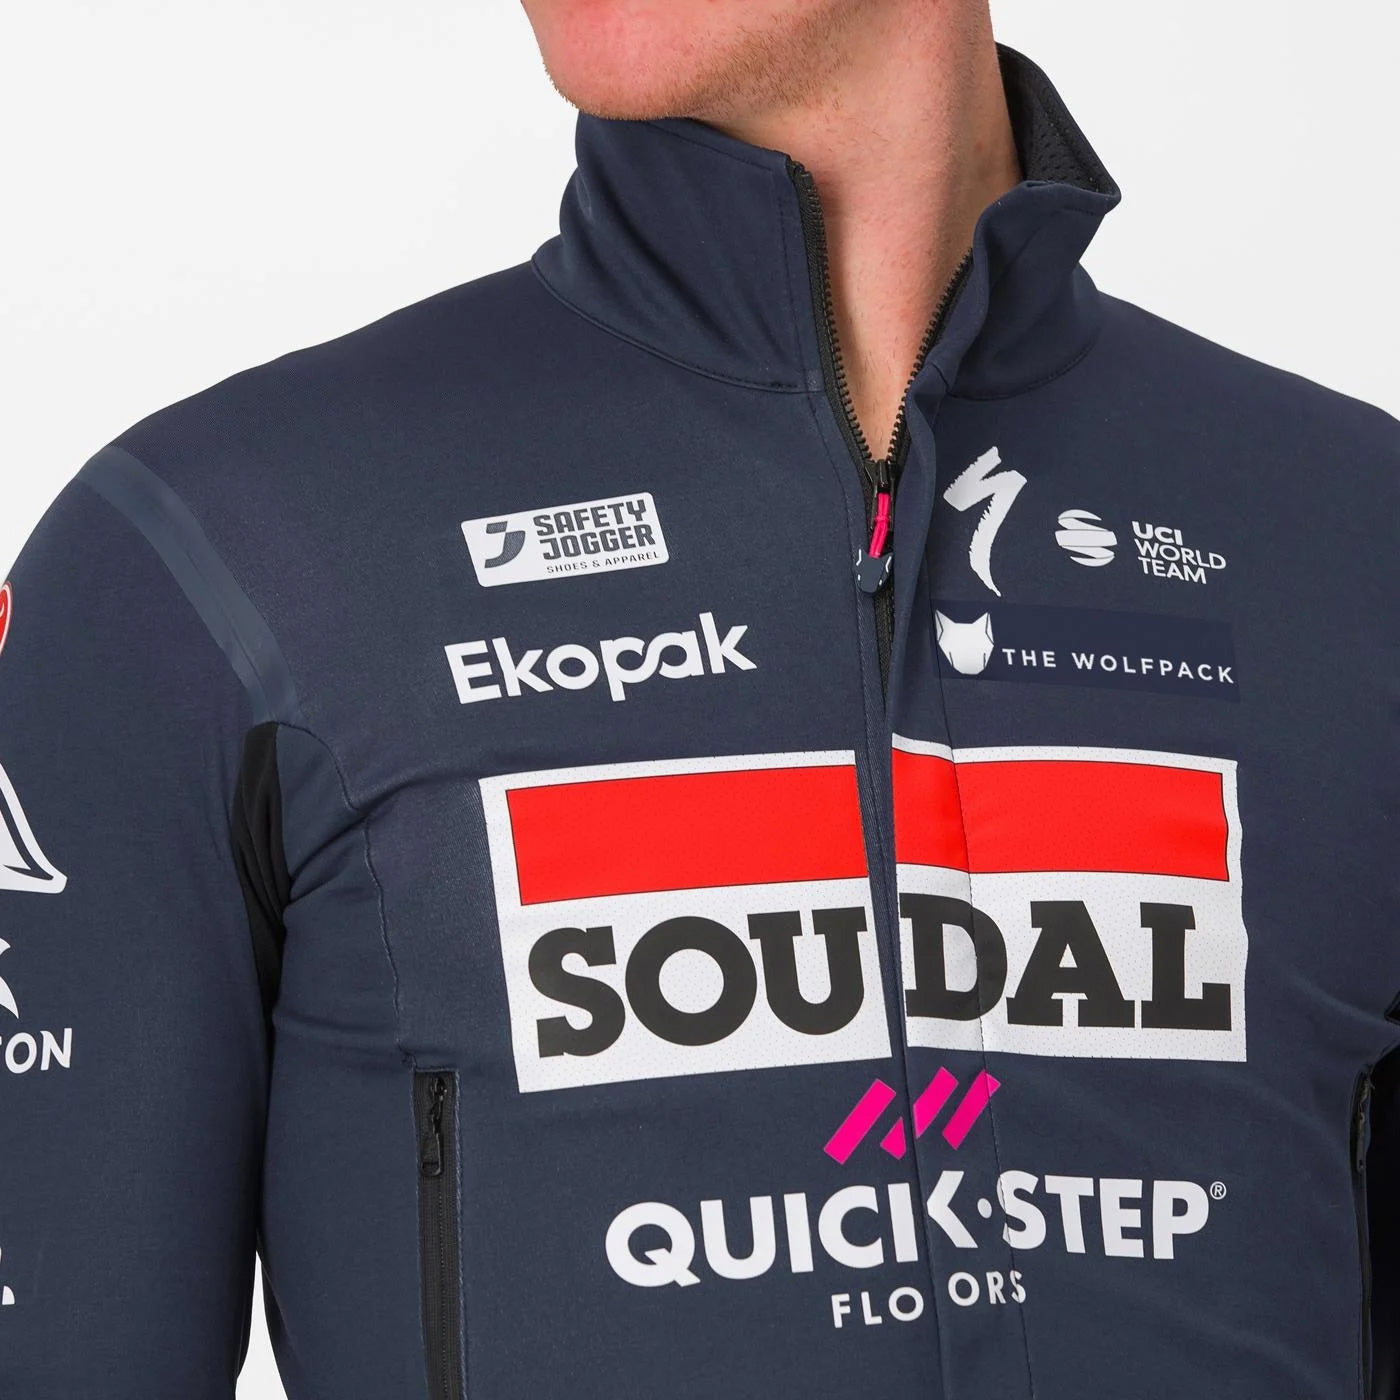 Maillot Castelli Soudal Quick-Step 2024 Gabba RoS 2